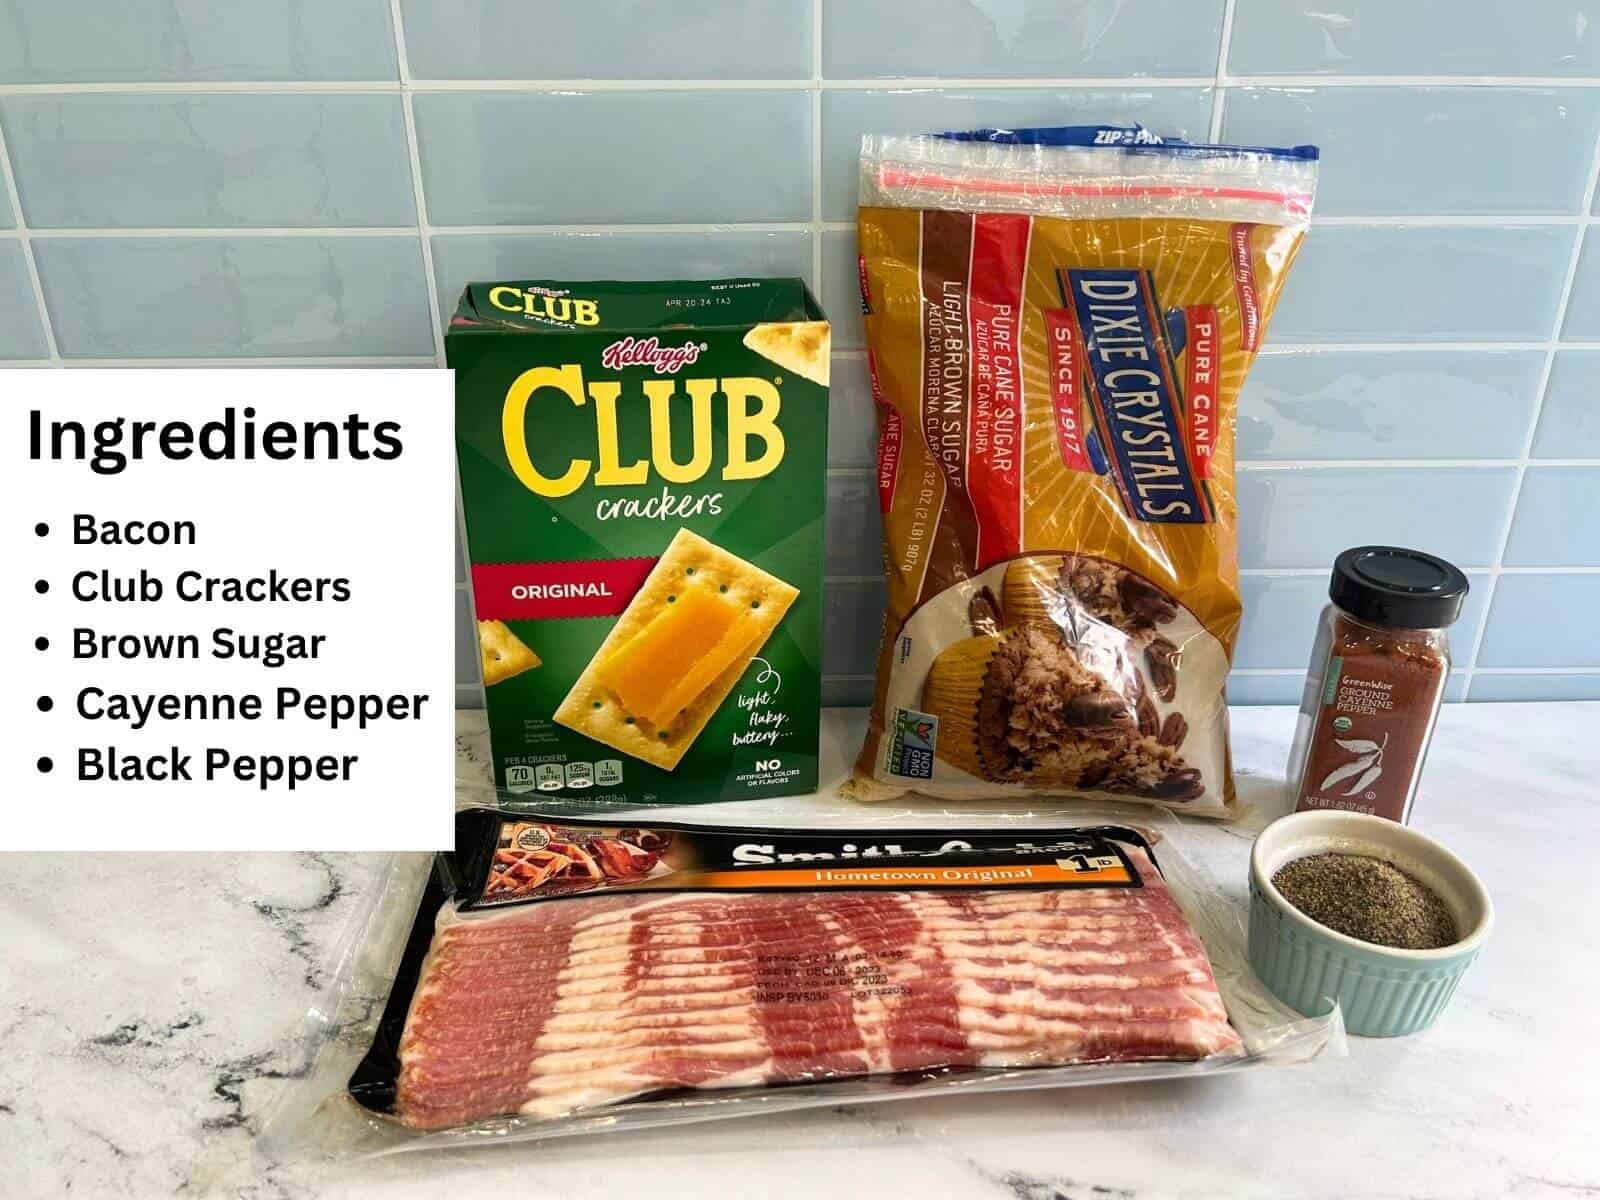 Ingredients of Bacon Crackers. Includes: bacon, club crackers, brown sugar, cayenne pepper, and black pepper.